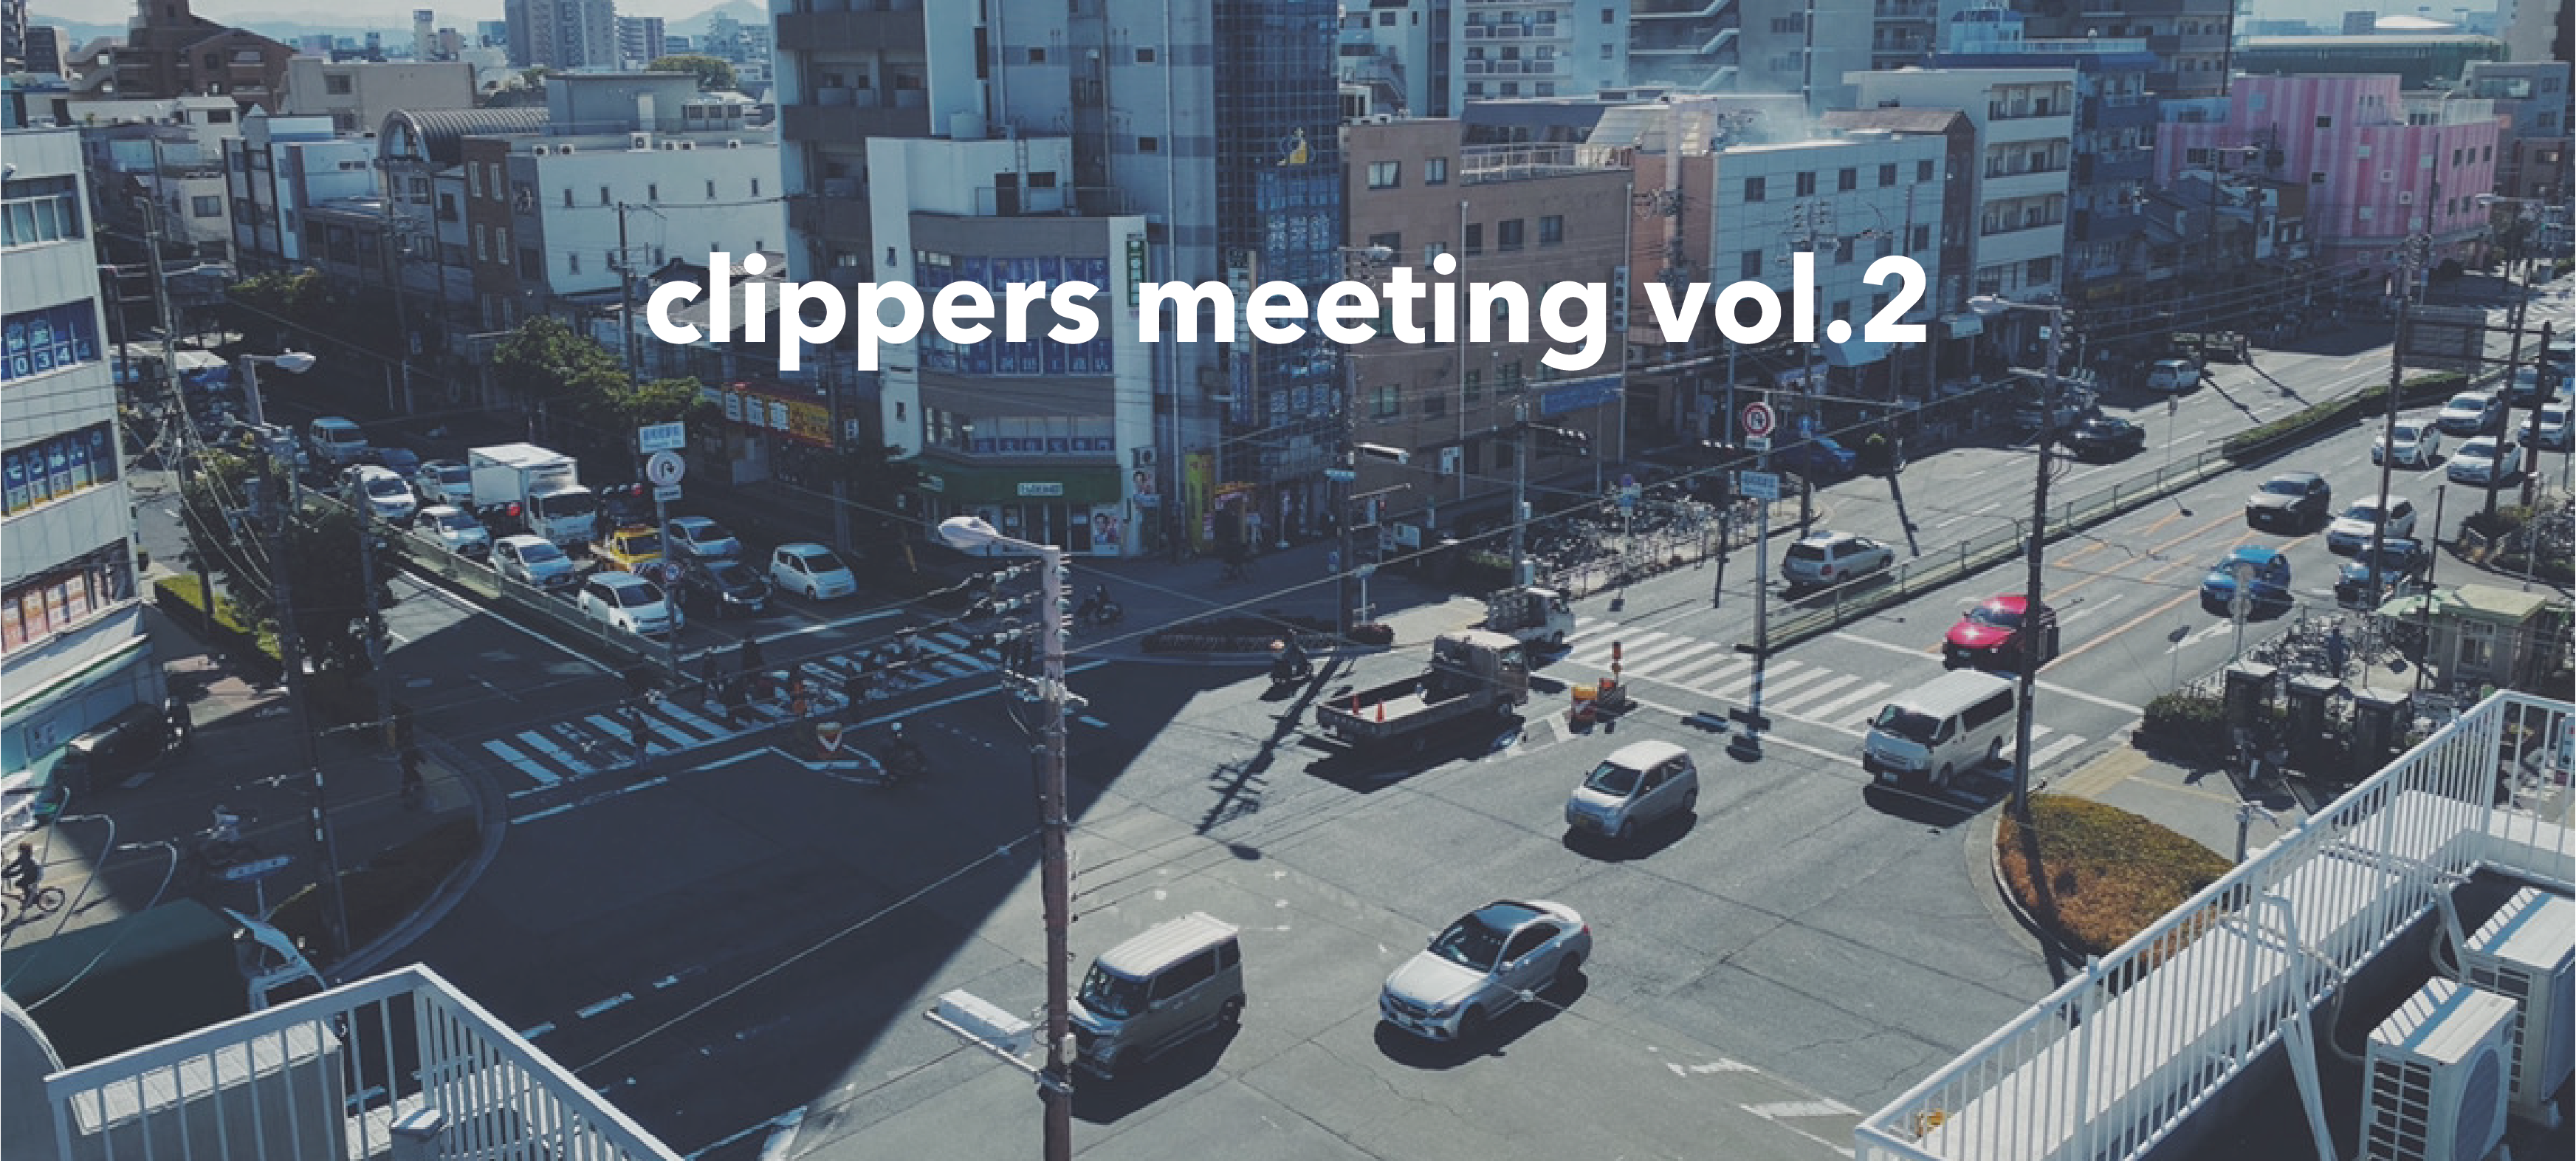 clippers meeting vol.2